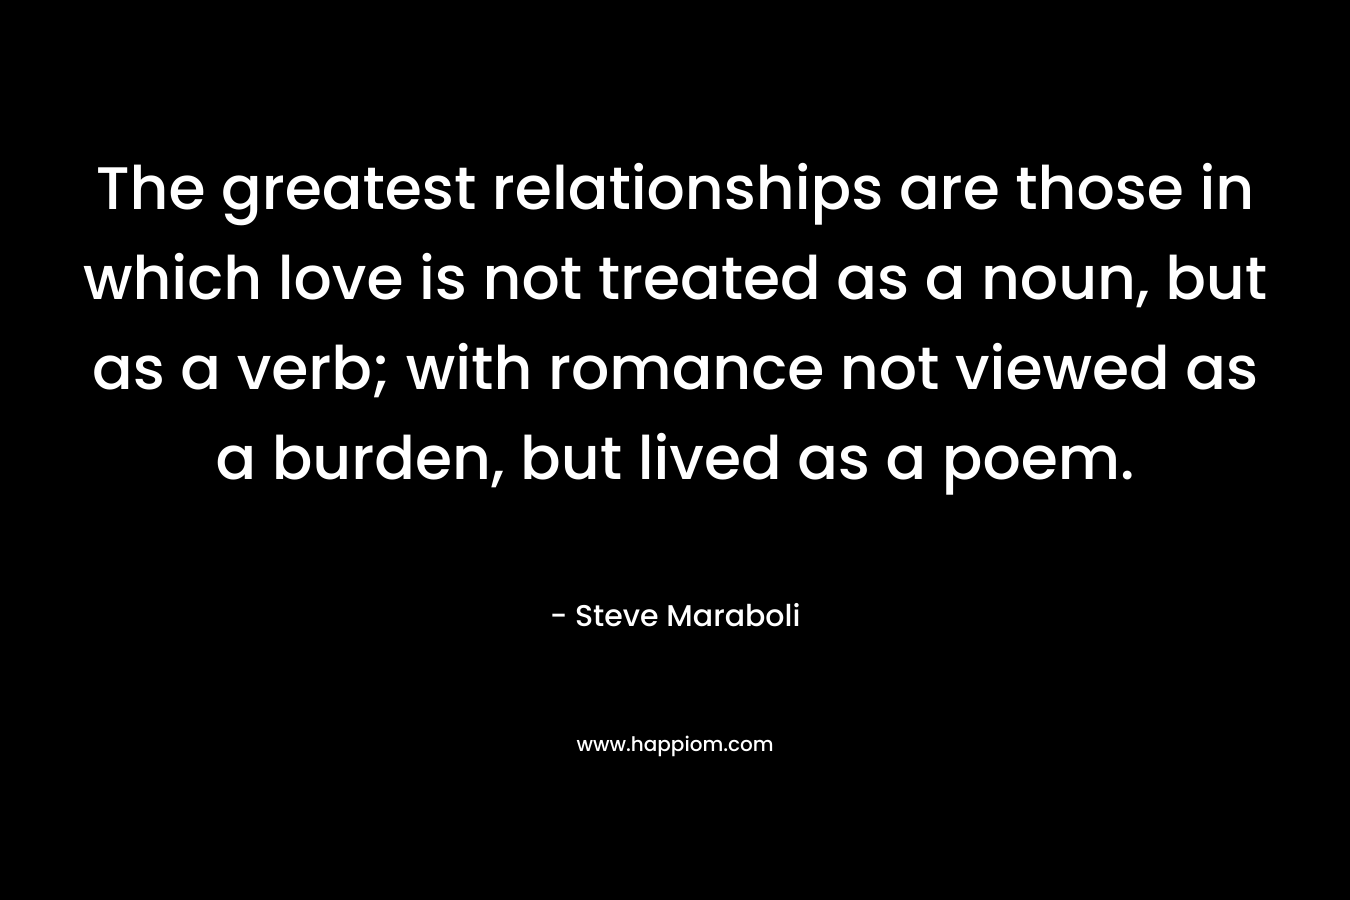 The greatest relationships are those in which love is not treated as a noun, but as a verb; with romance not viewed as a burden, but lived as a poem. – Steve Maraboli